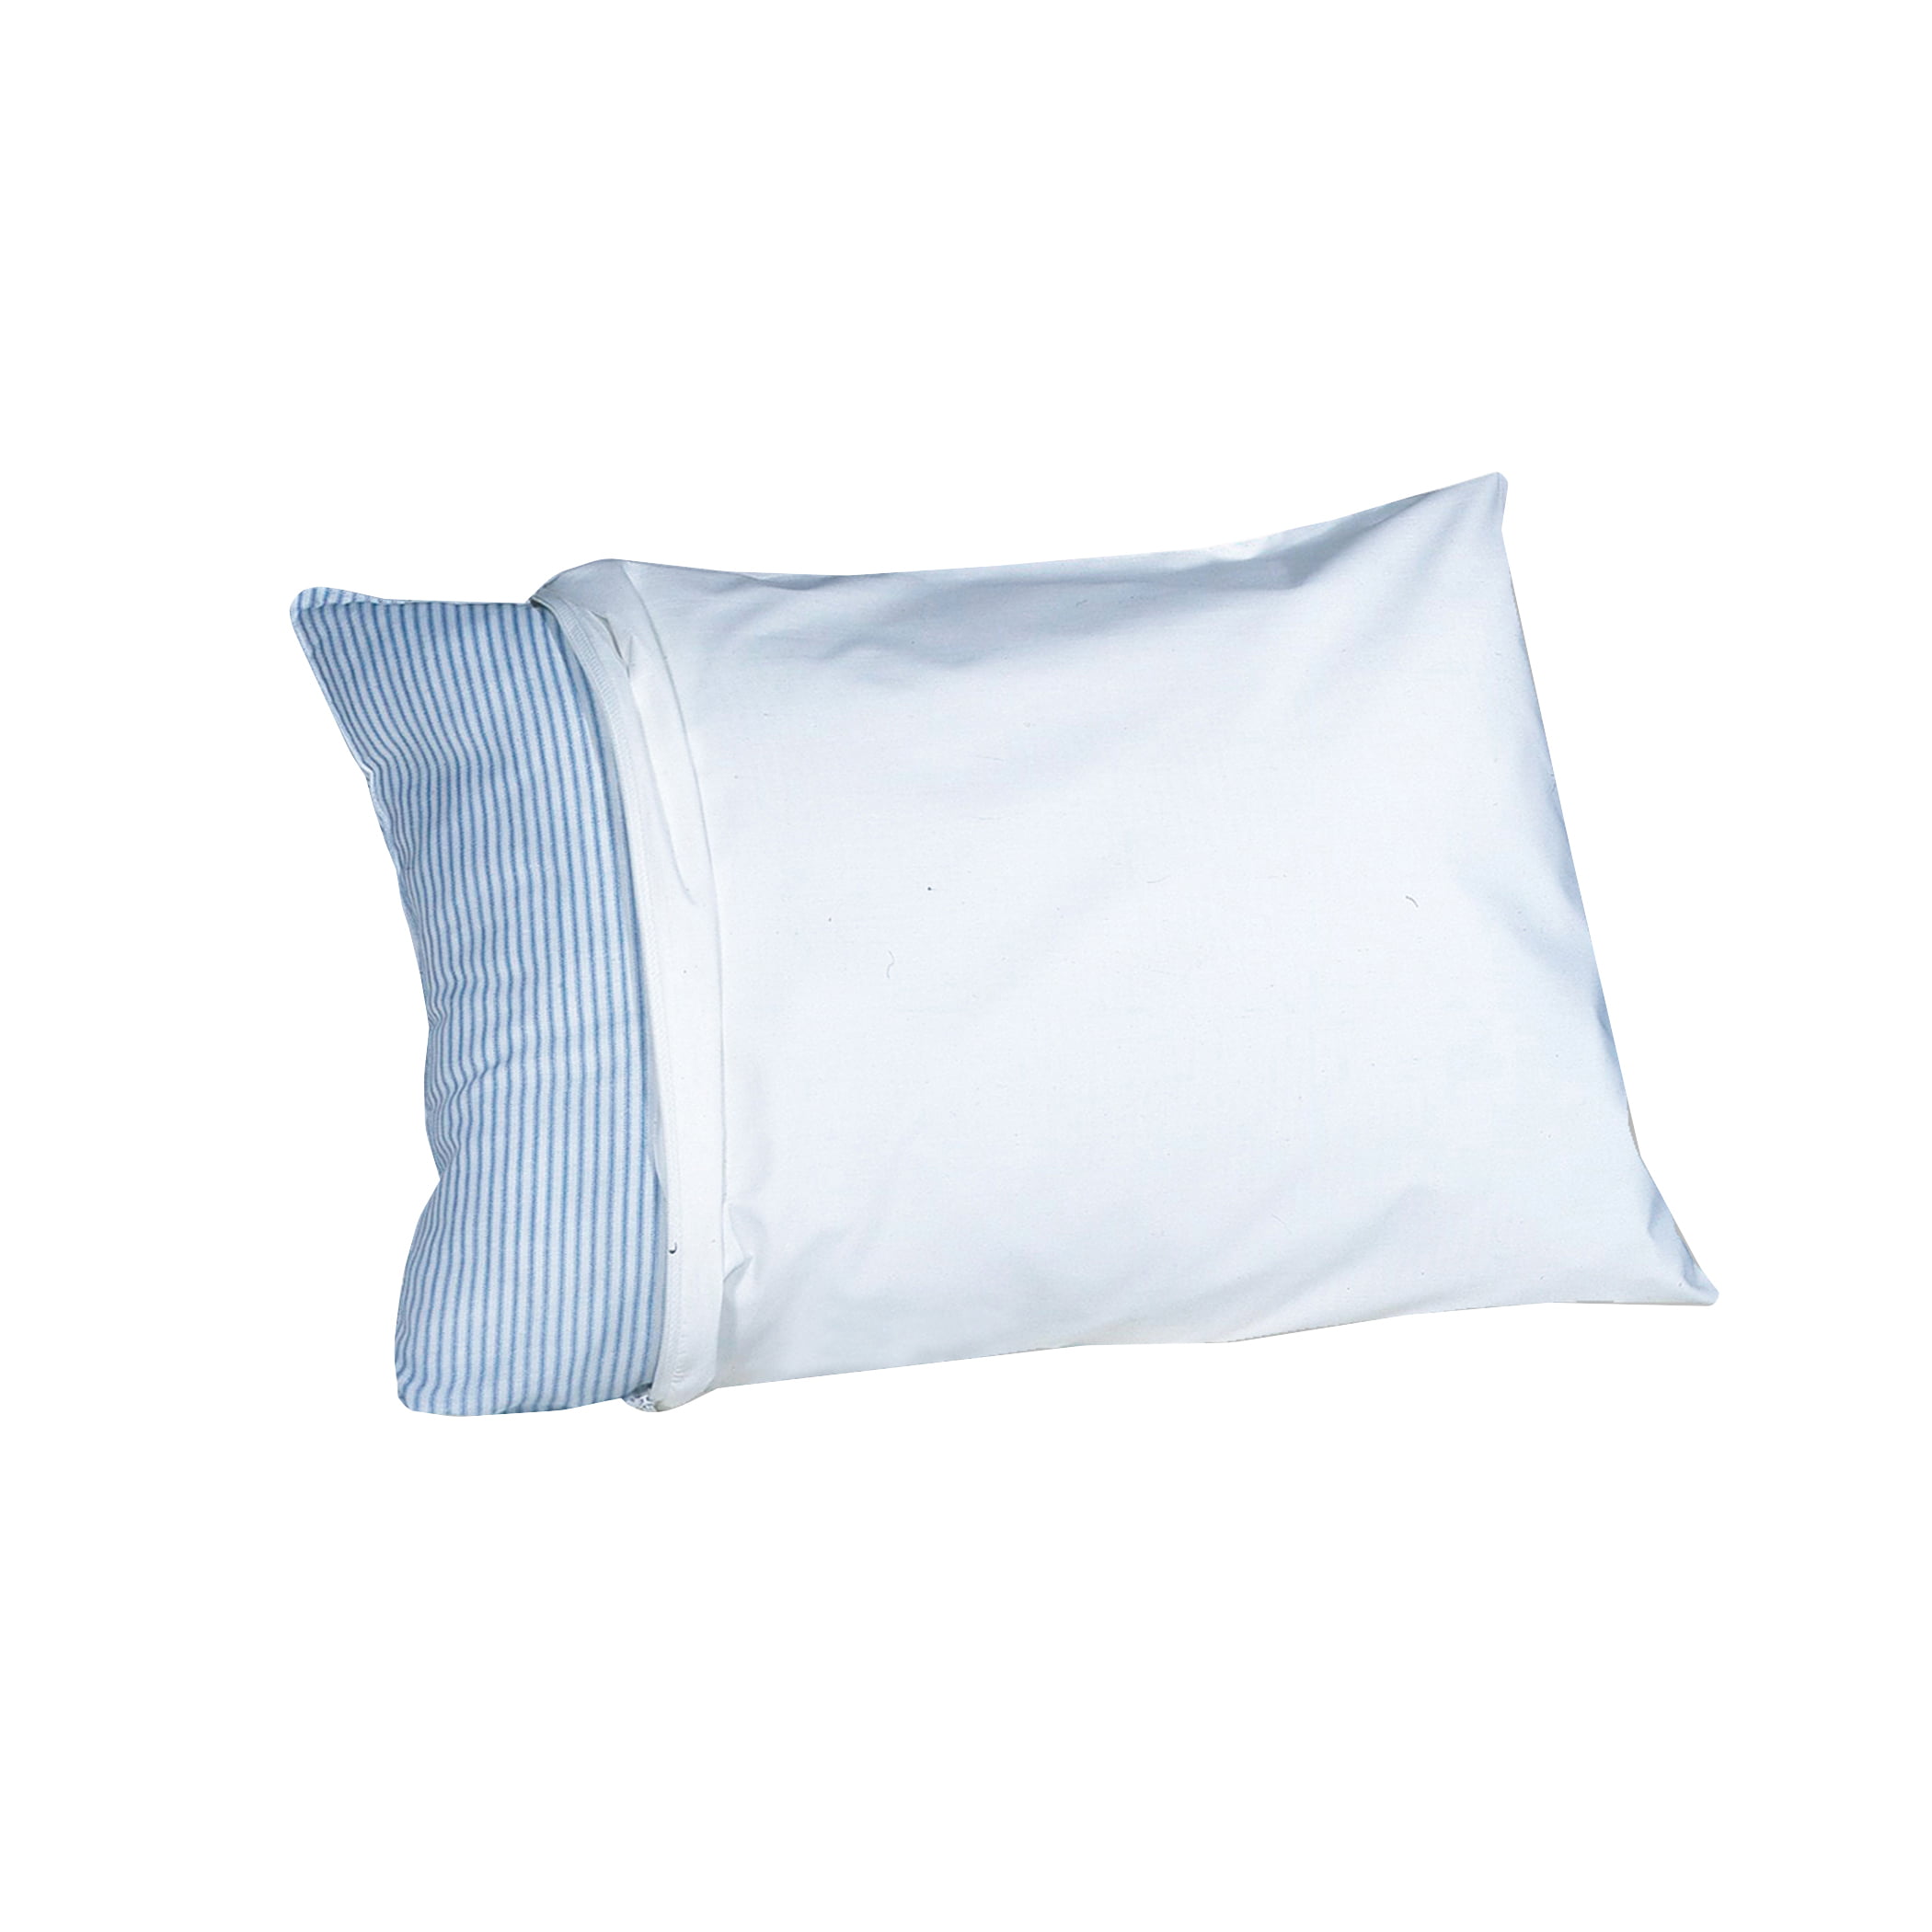 Fresh Ideas 100/% Cotton Teflon Coated Pillow Protector Waterproof and Stain Resistant 2 Pack Standard White